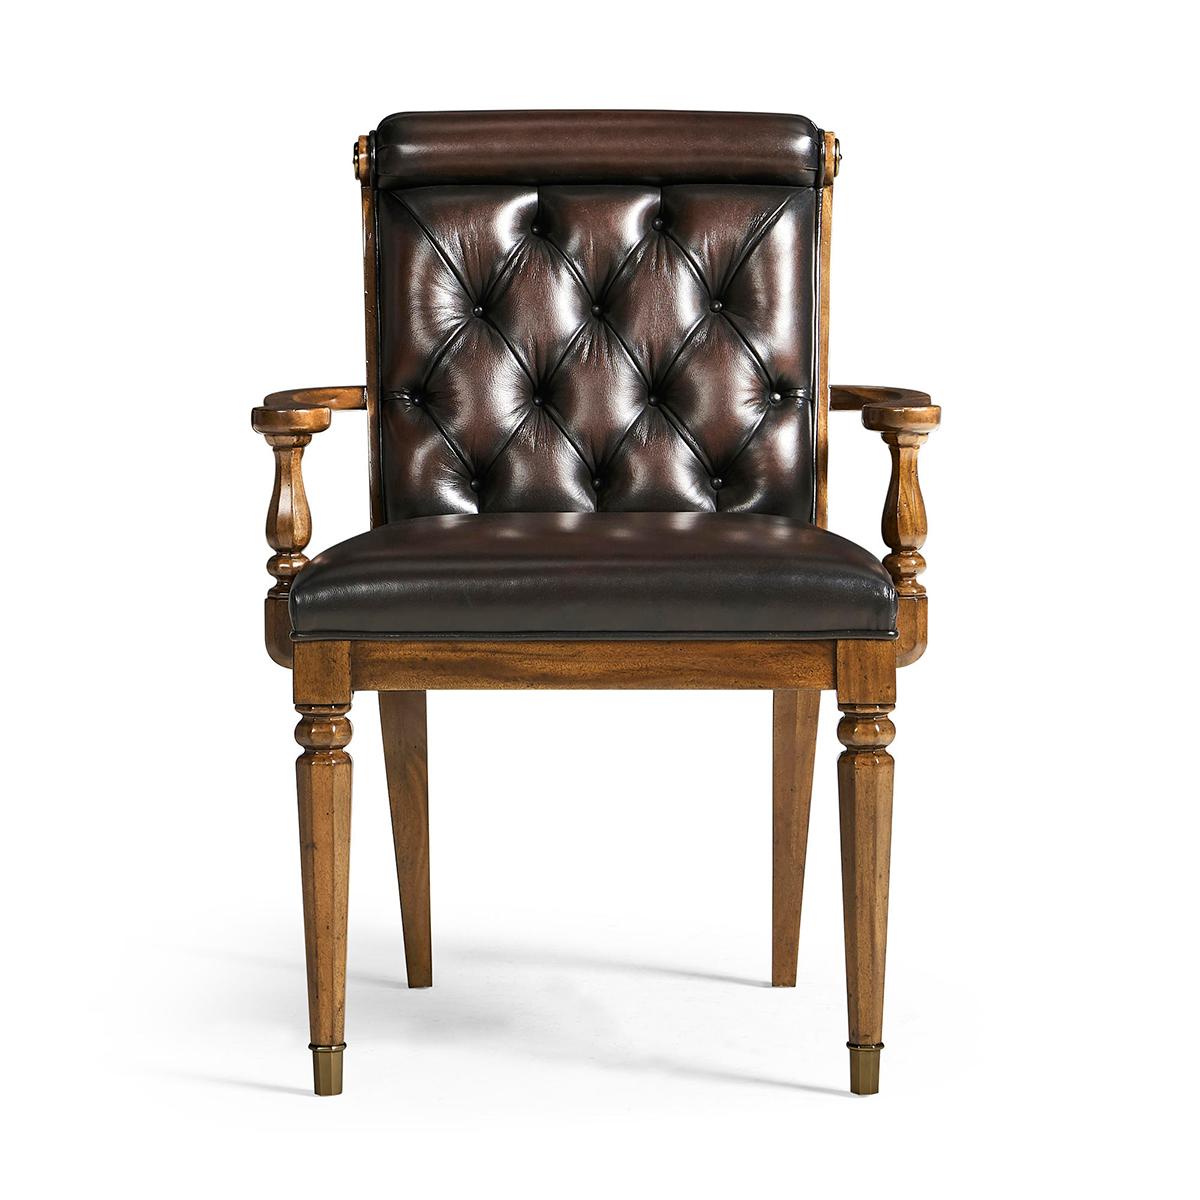 This chair is masterfully crafted from the finest materials, featuring hand-glazed antique leather upholstery that brings a vintage charm and a deep sense of history to any room. 

The chair has a durable mahogany frame, soft foam cushioning, and